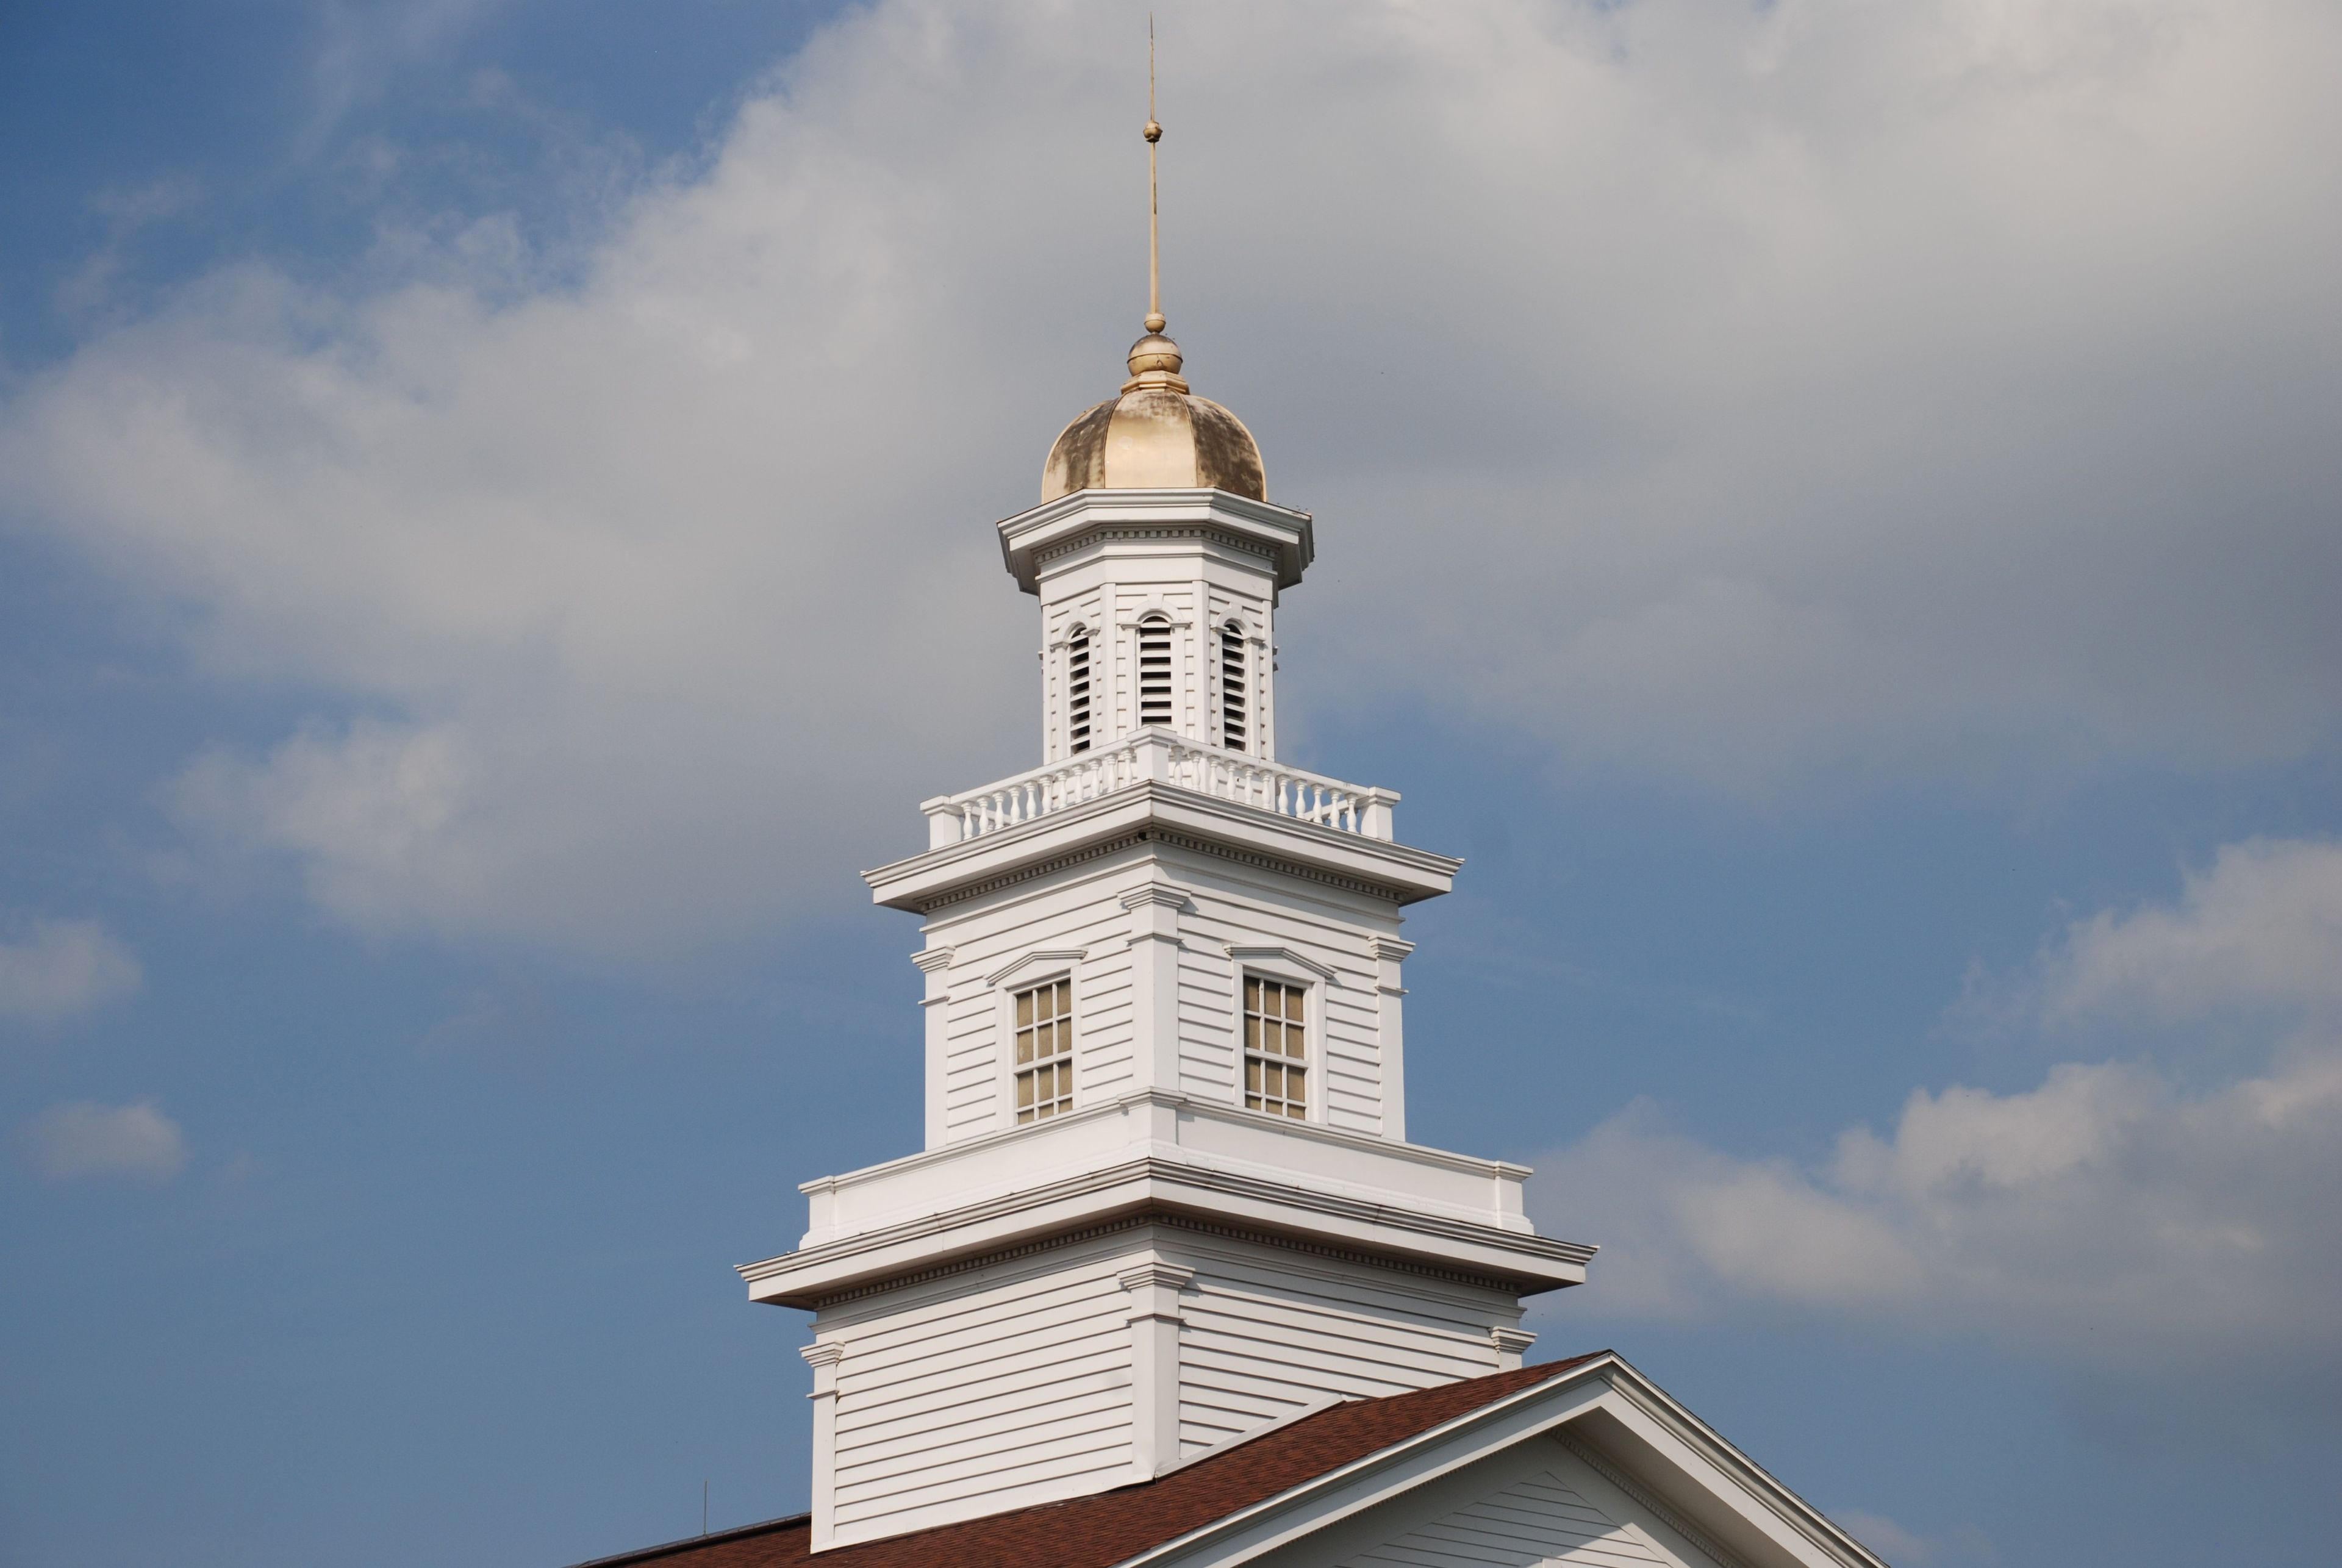 The steeple of a chapel in Fayette, New York.